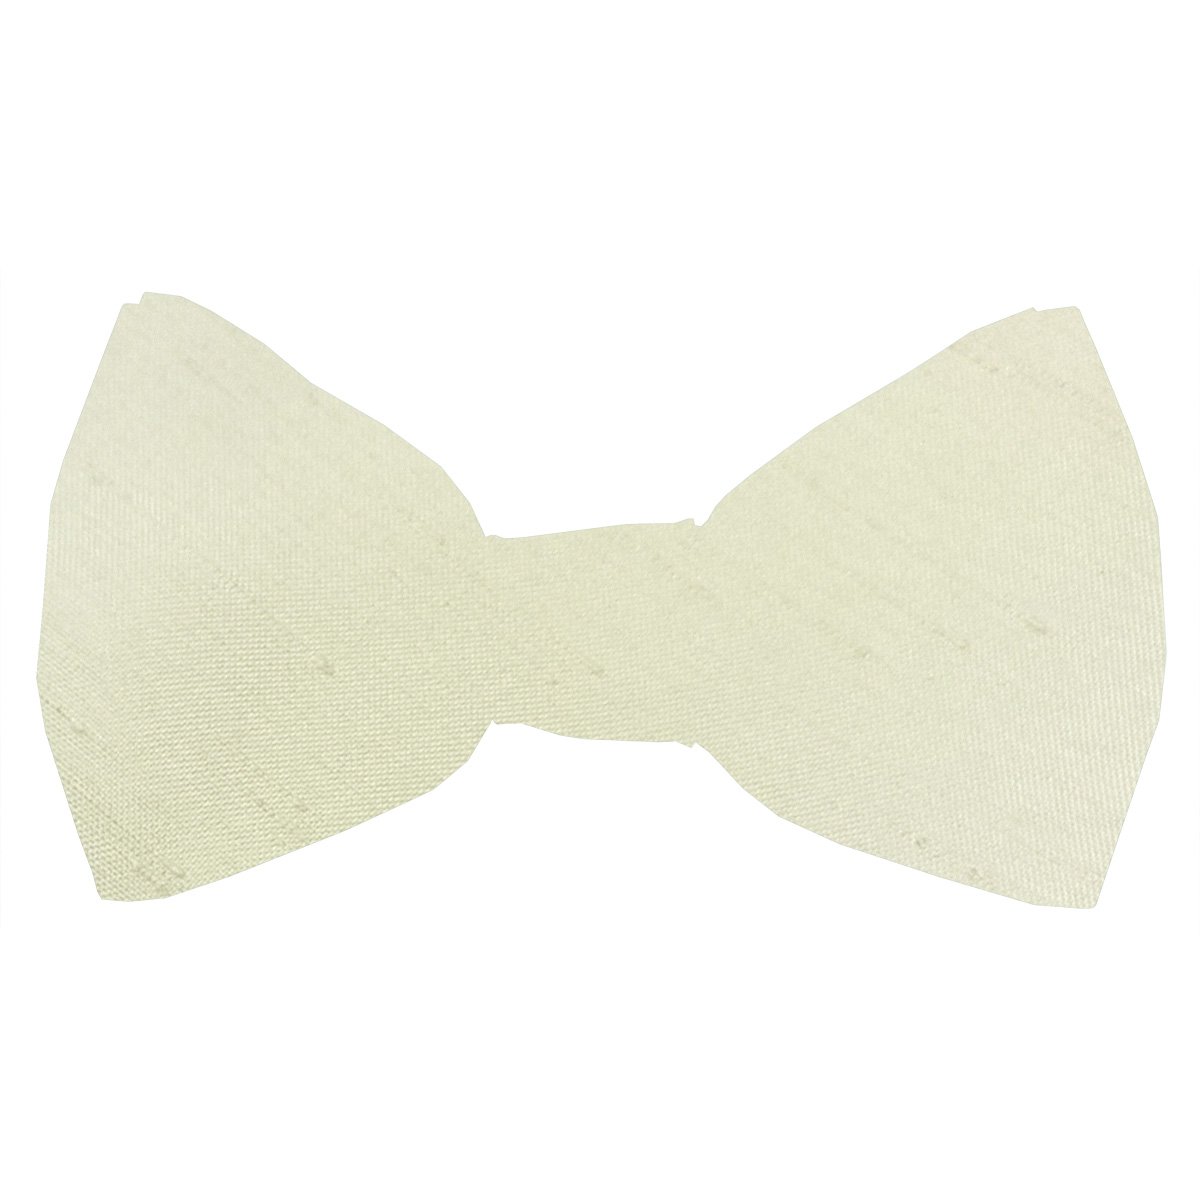 Champagne Ivory Shantung Boys Bow Ties - Childrenswear - Neckstrap - Swagger & Swoon